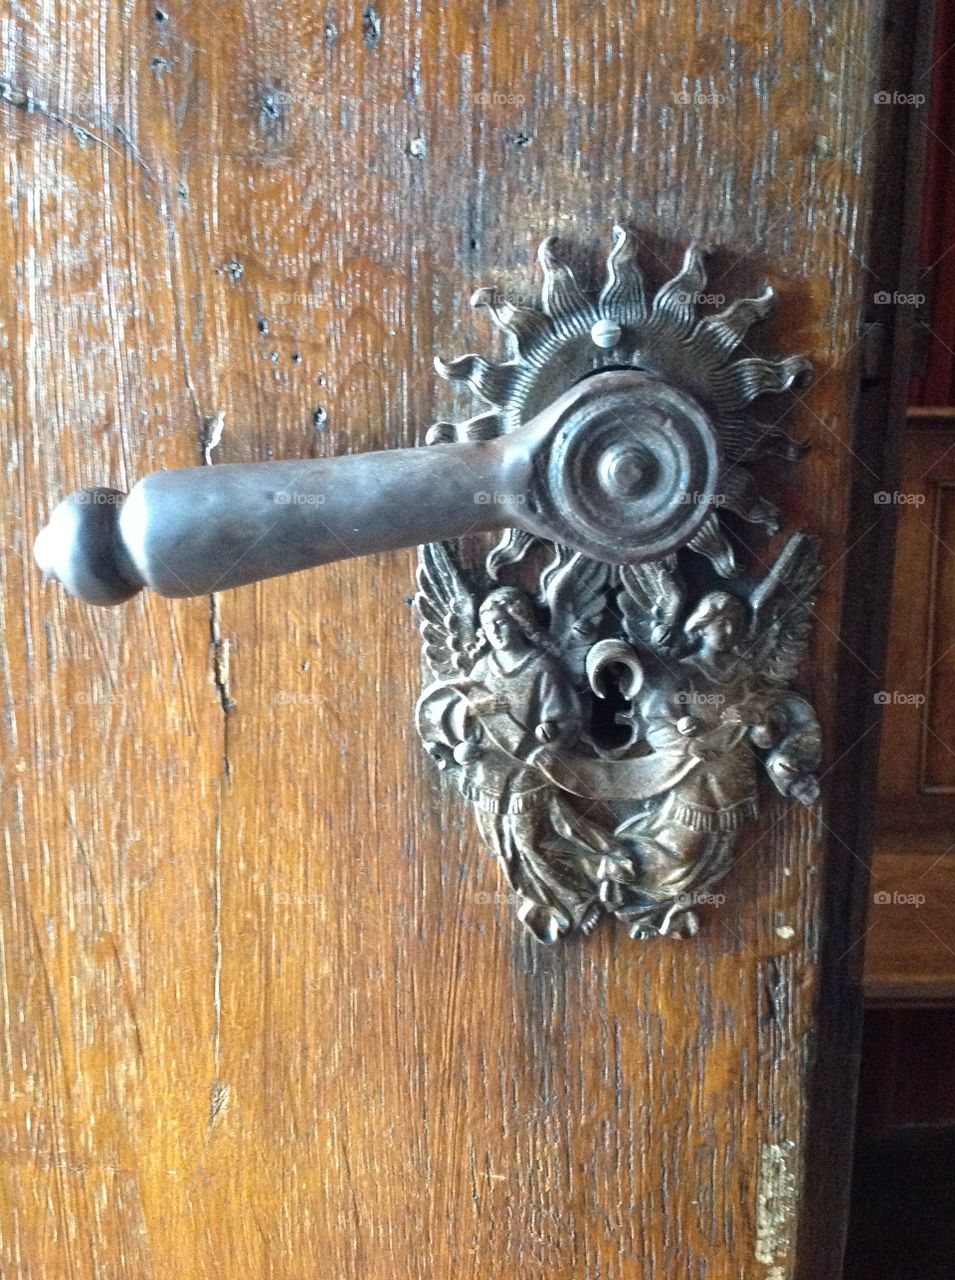 Castle door handle. Hohenzollern Castle, Bisinger, Germany. "Zollerberg" dates back to the 12th century.